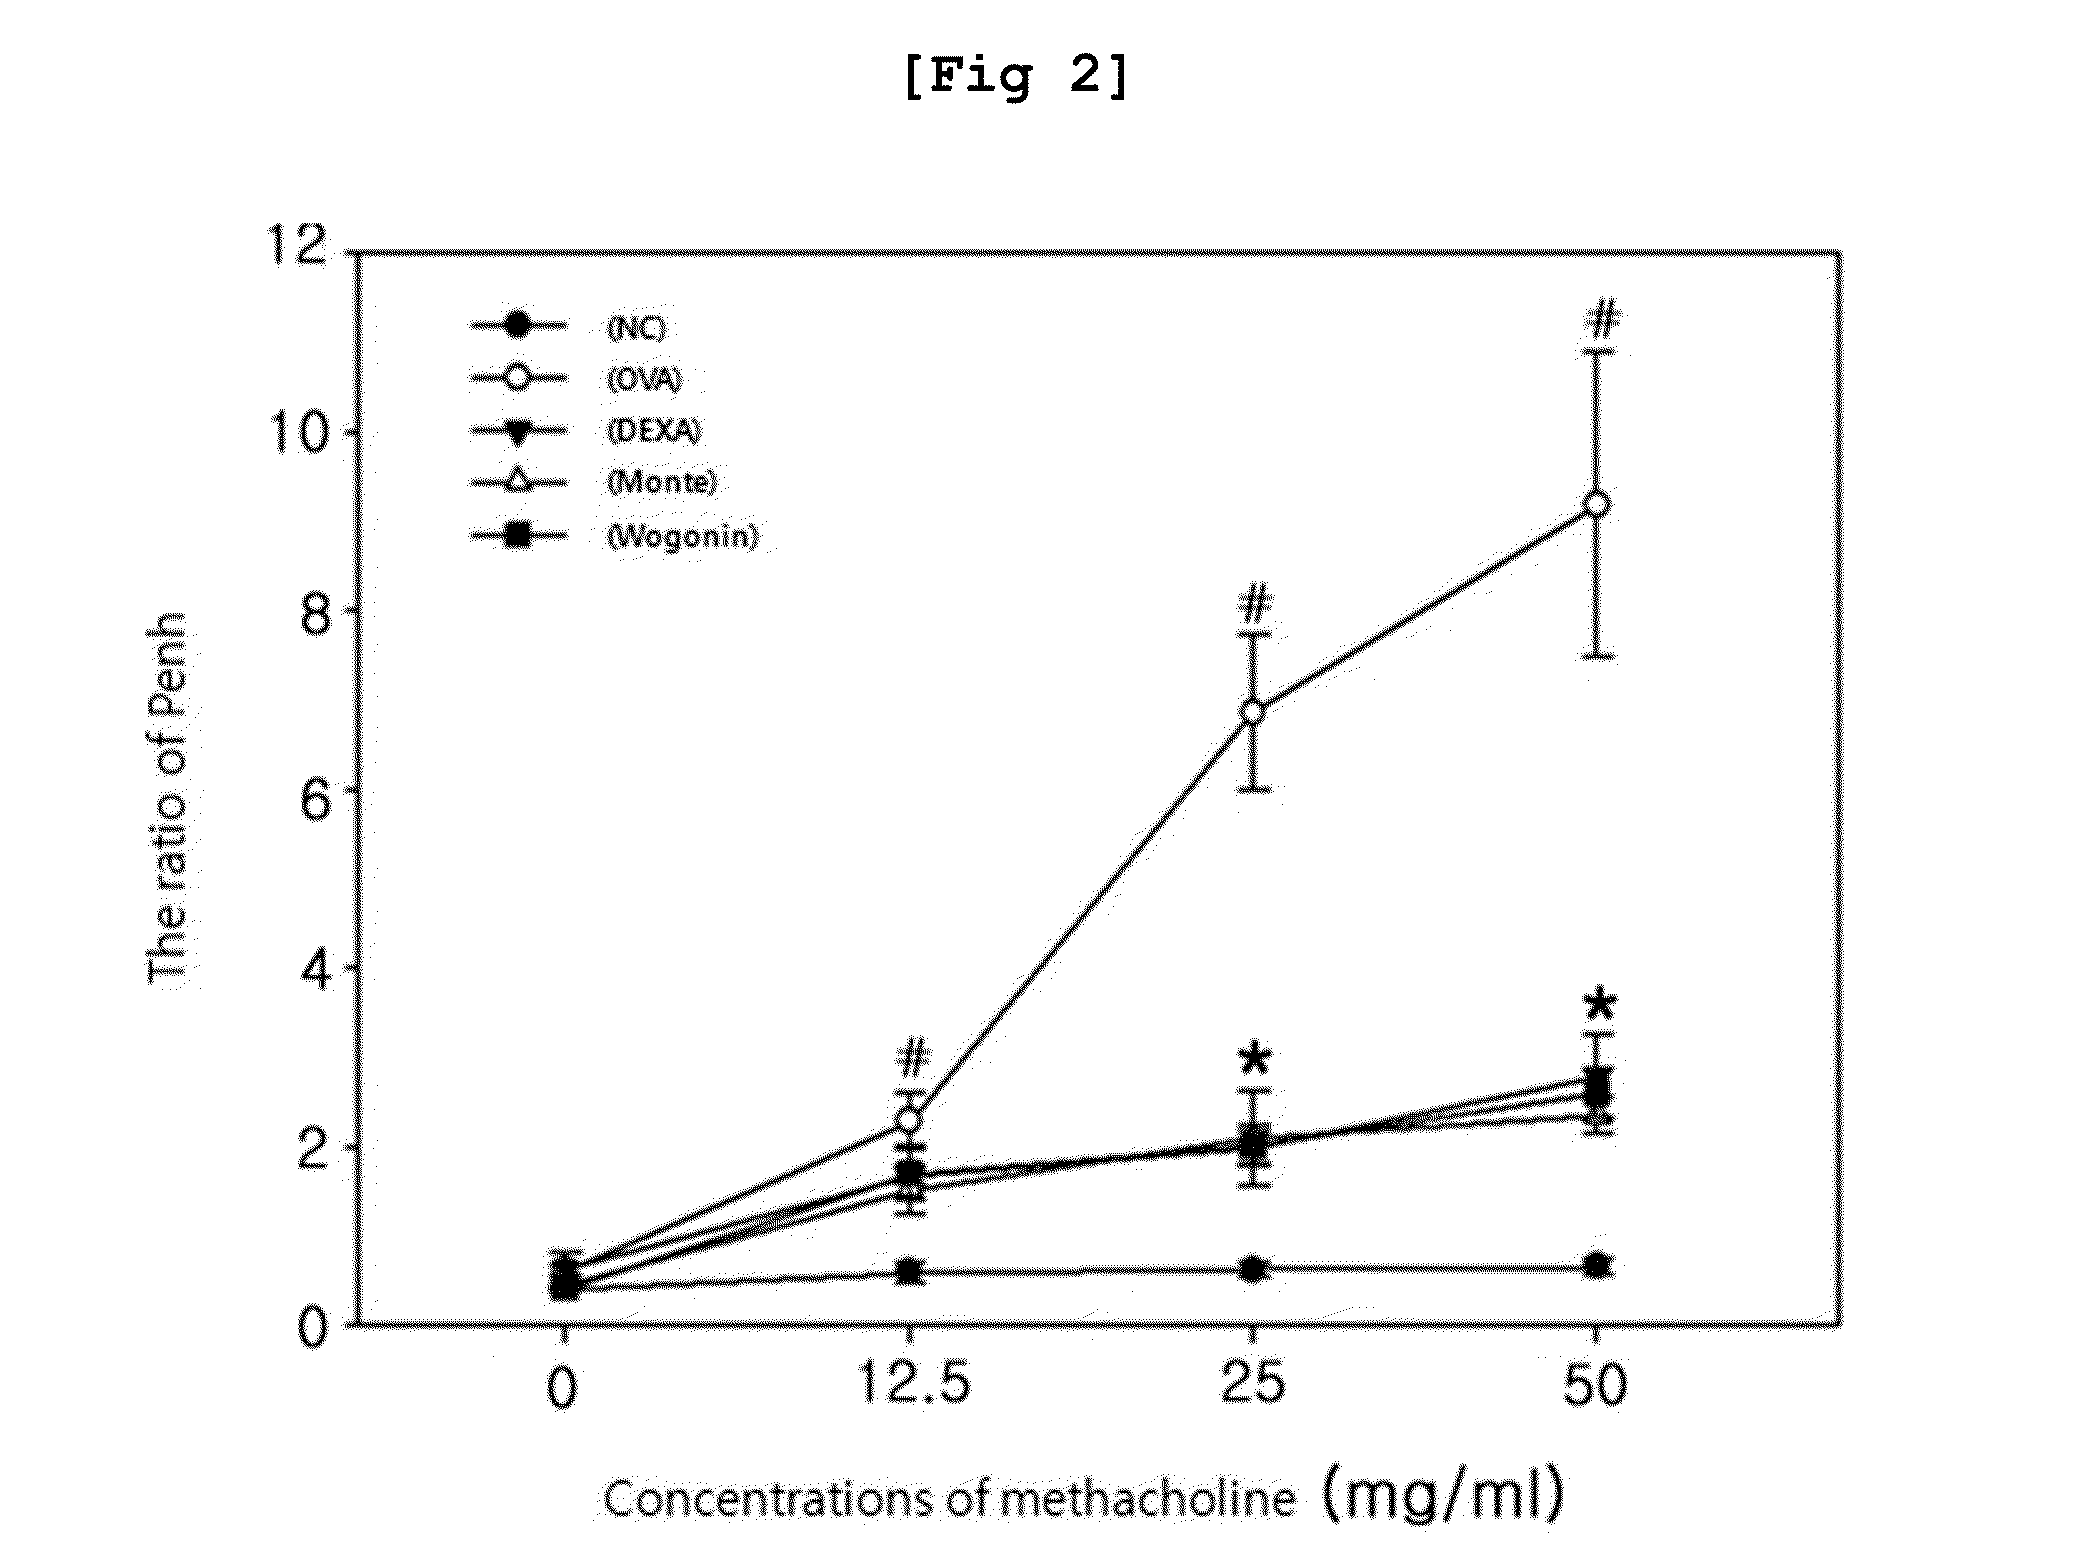 Pharmaceutical composition containing wogonin as an active ingredient for preventing or treating asthma